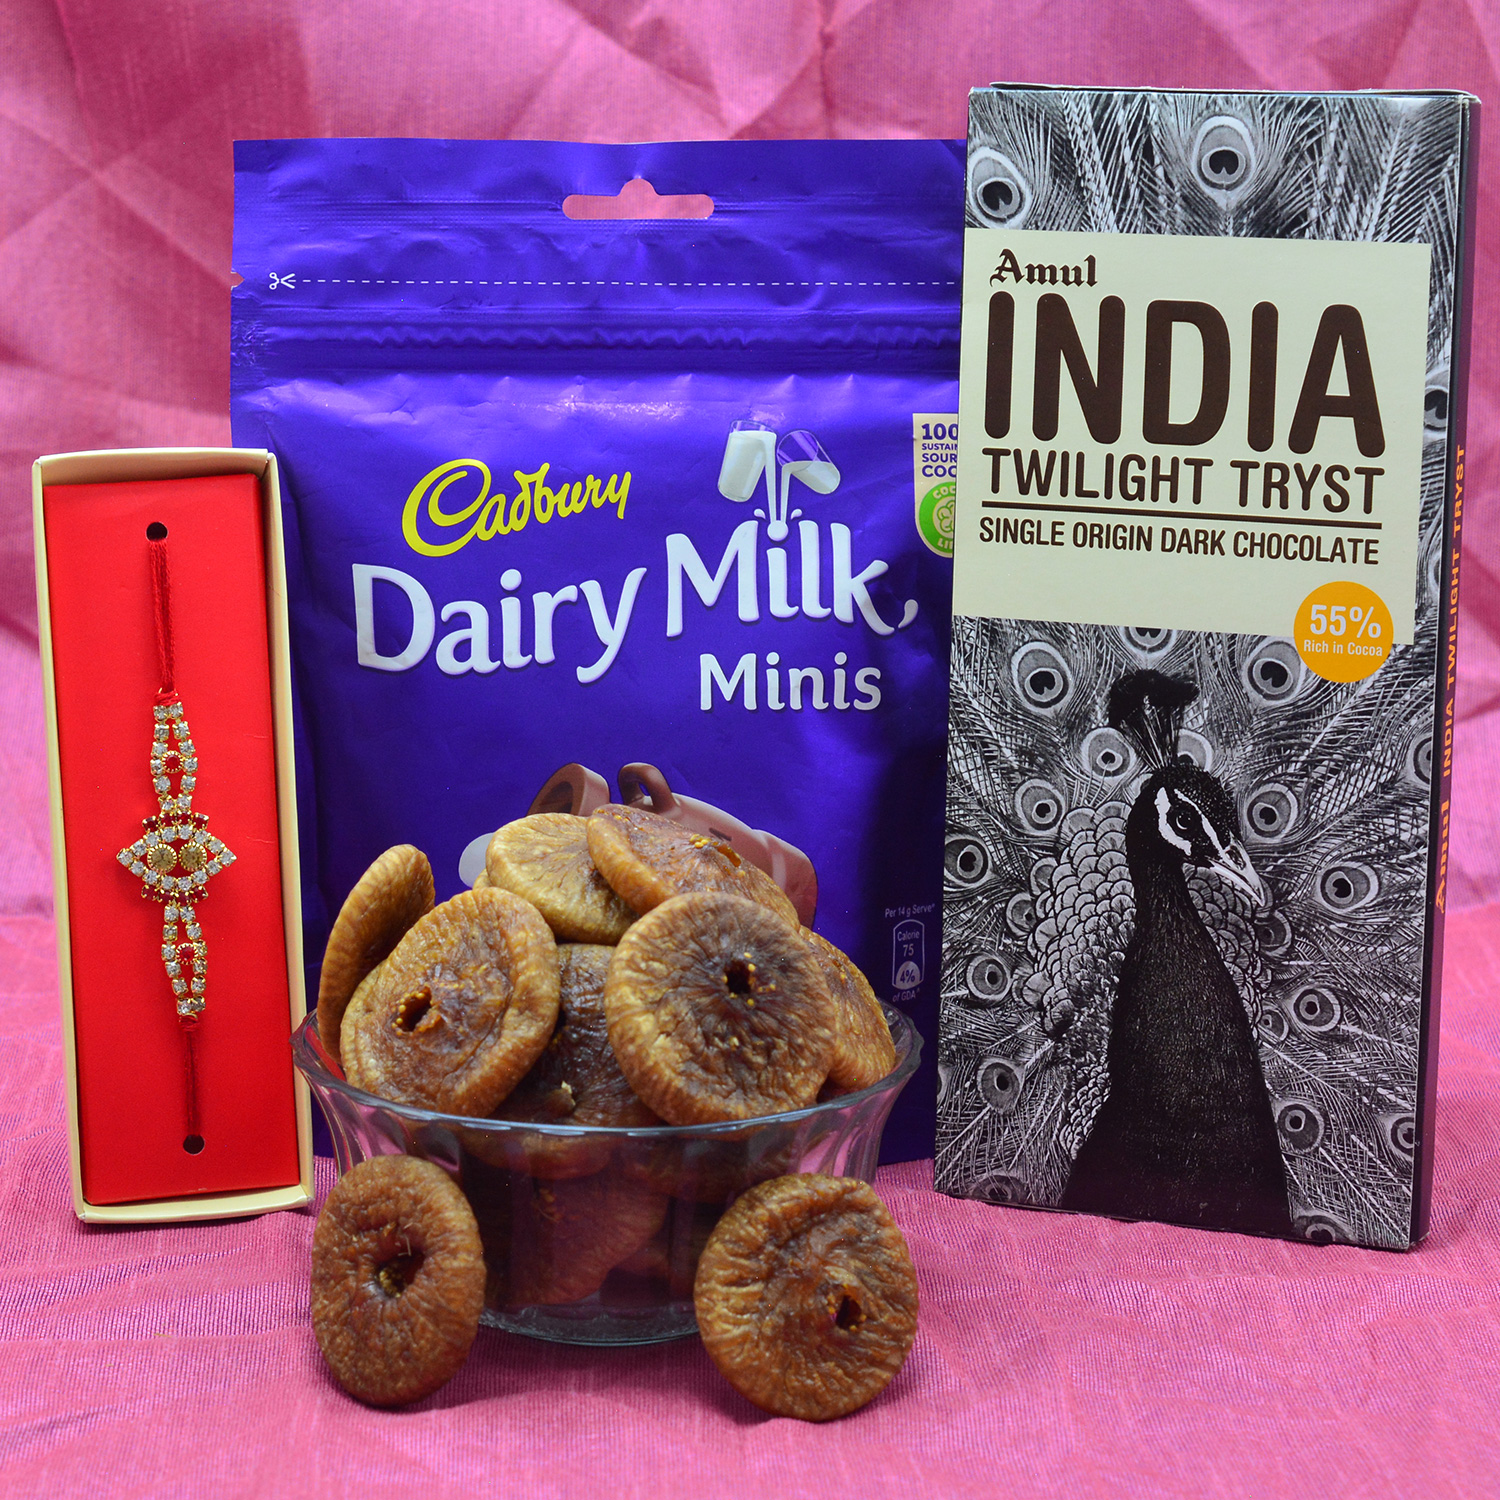 Cadbury Dairy Milk Minis and Amul Chocolate along with Brother Rakhi and Anjeer Dry Fruit